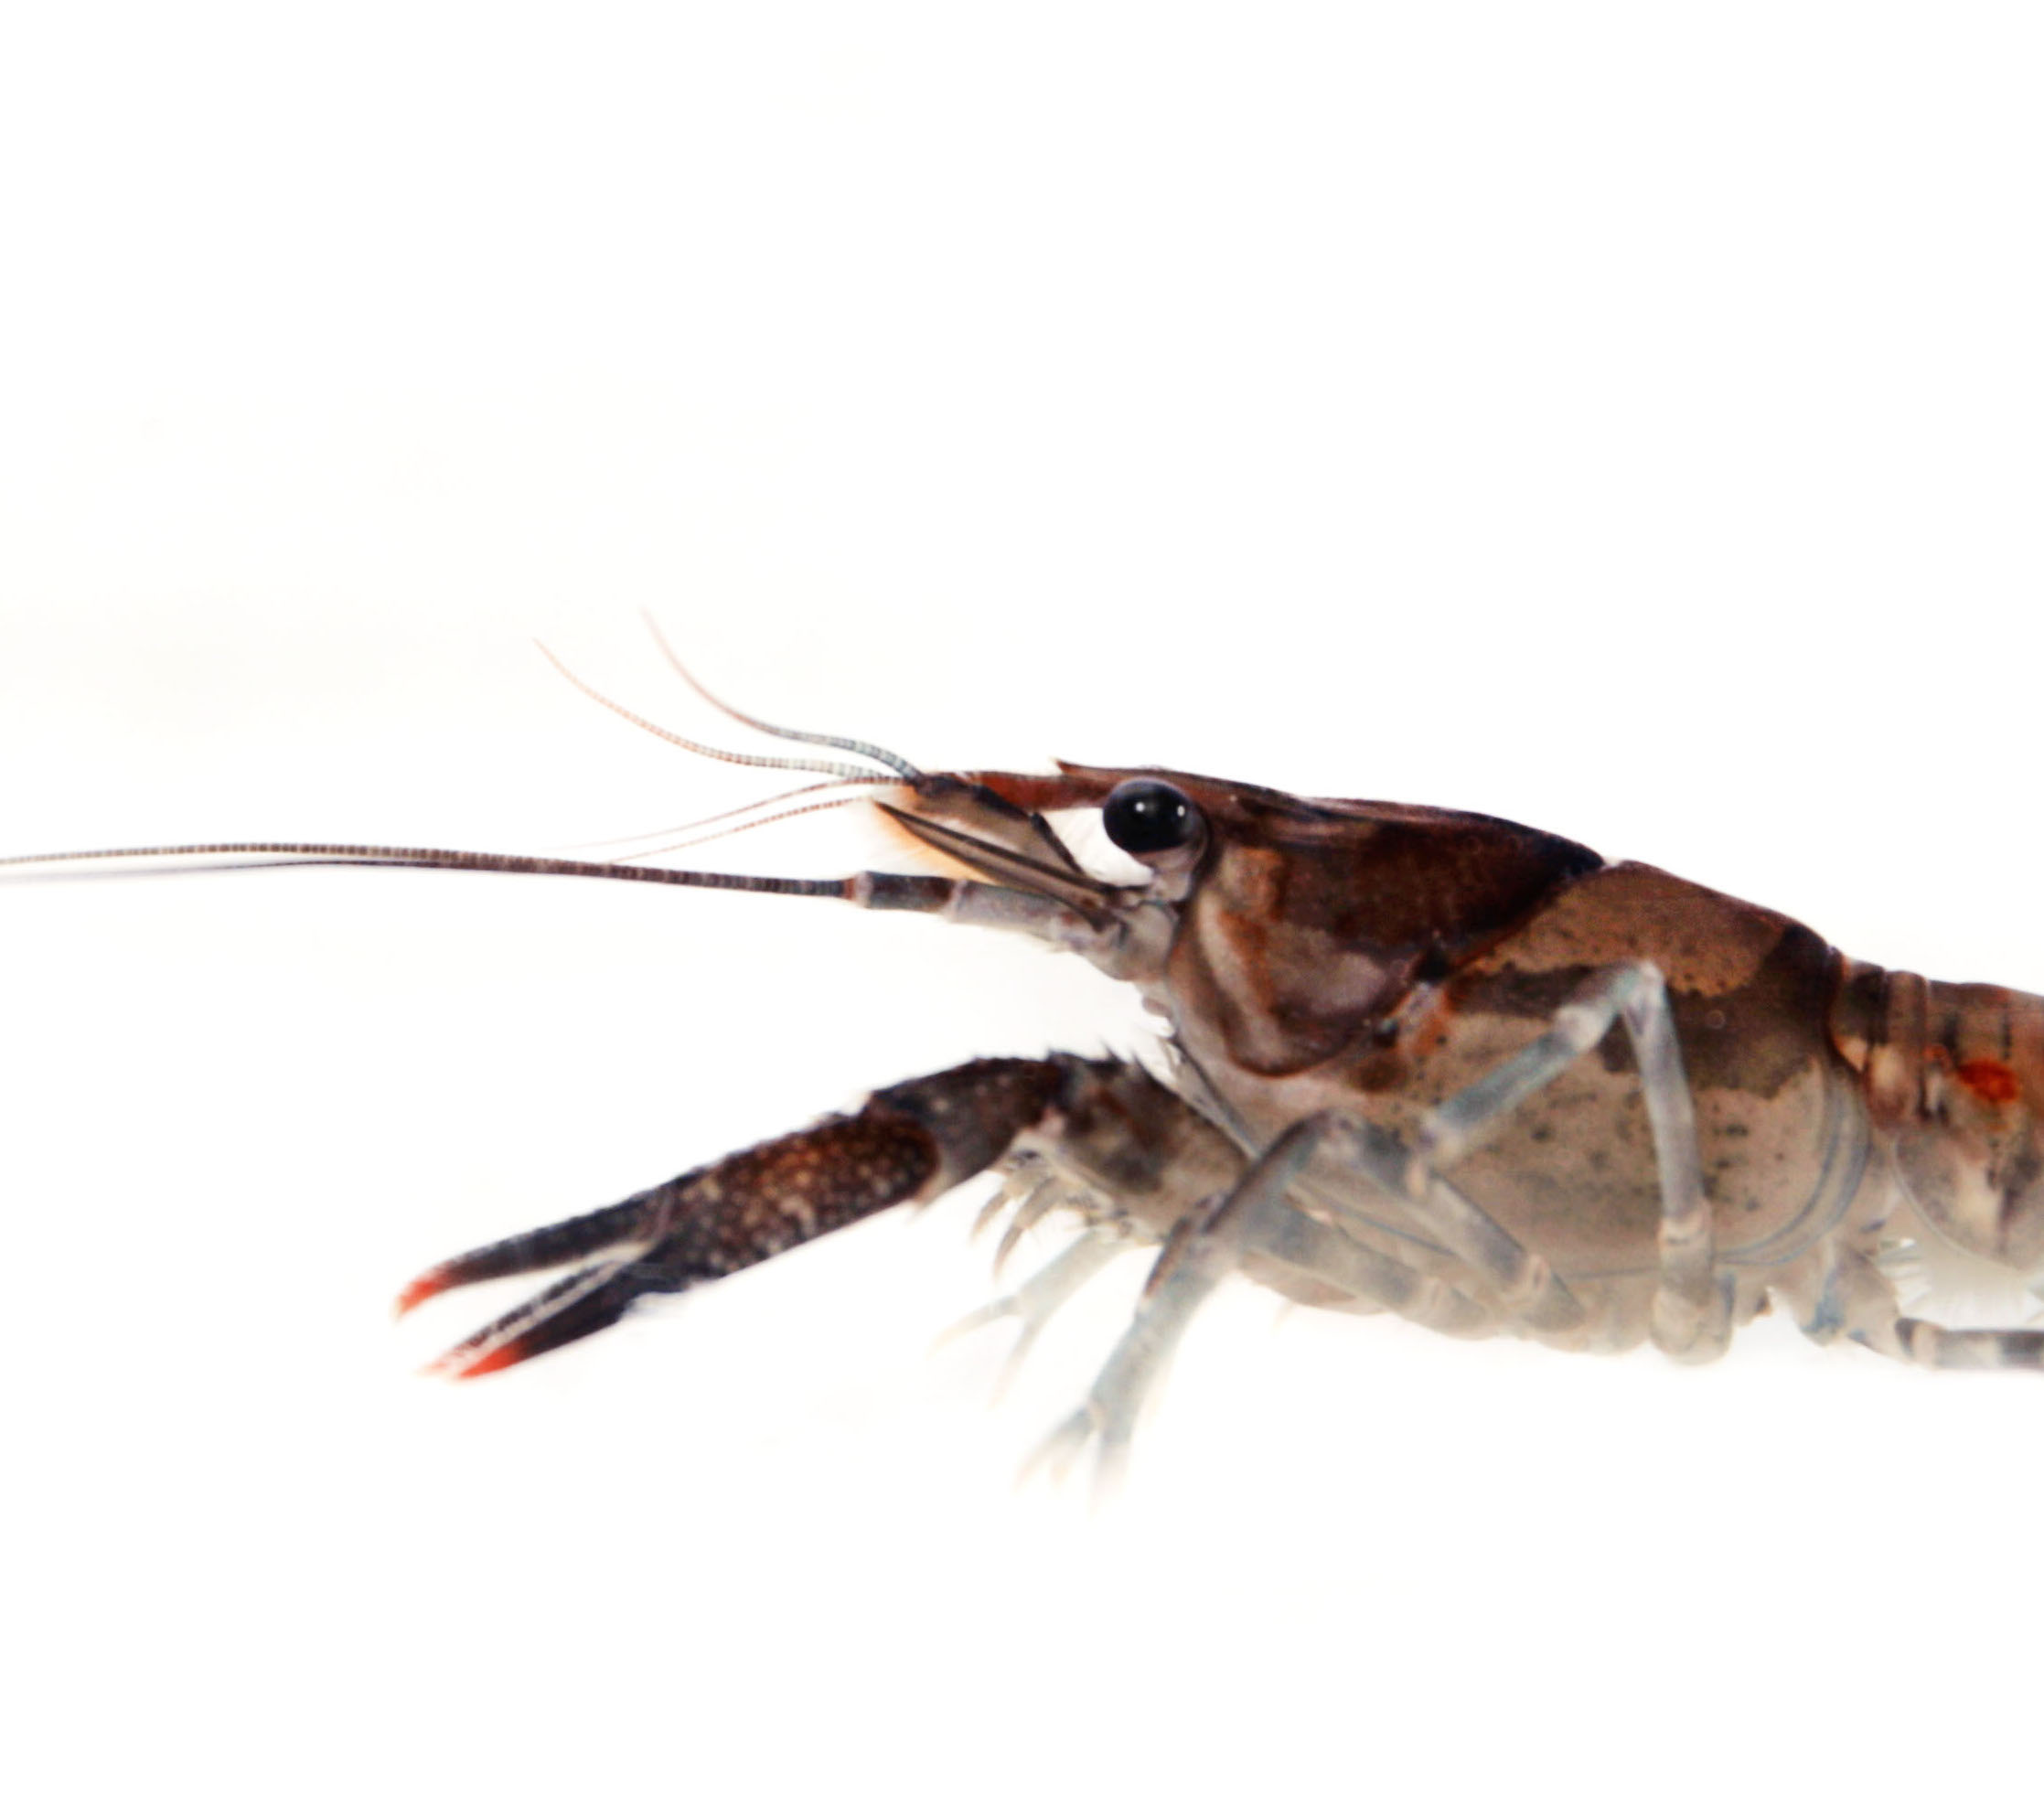 Not acting like themselves: Antidepressants in environment alter crayfish behavior